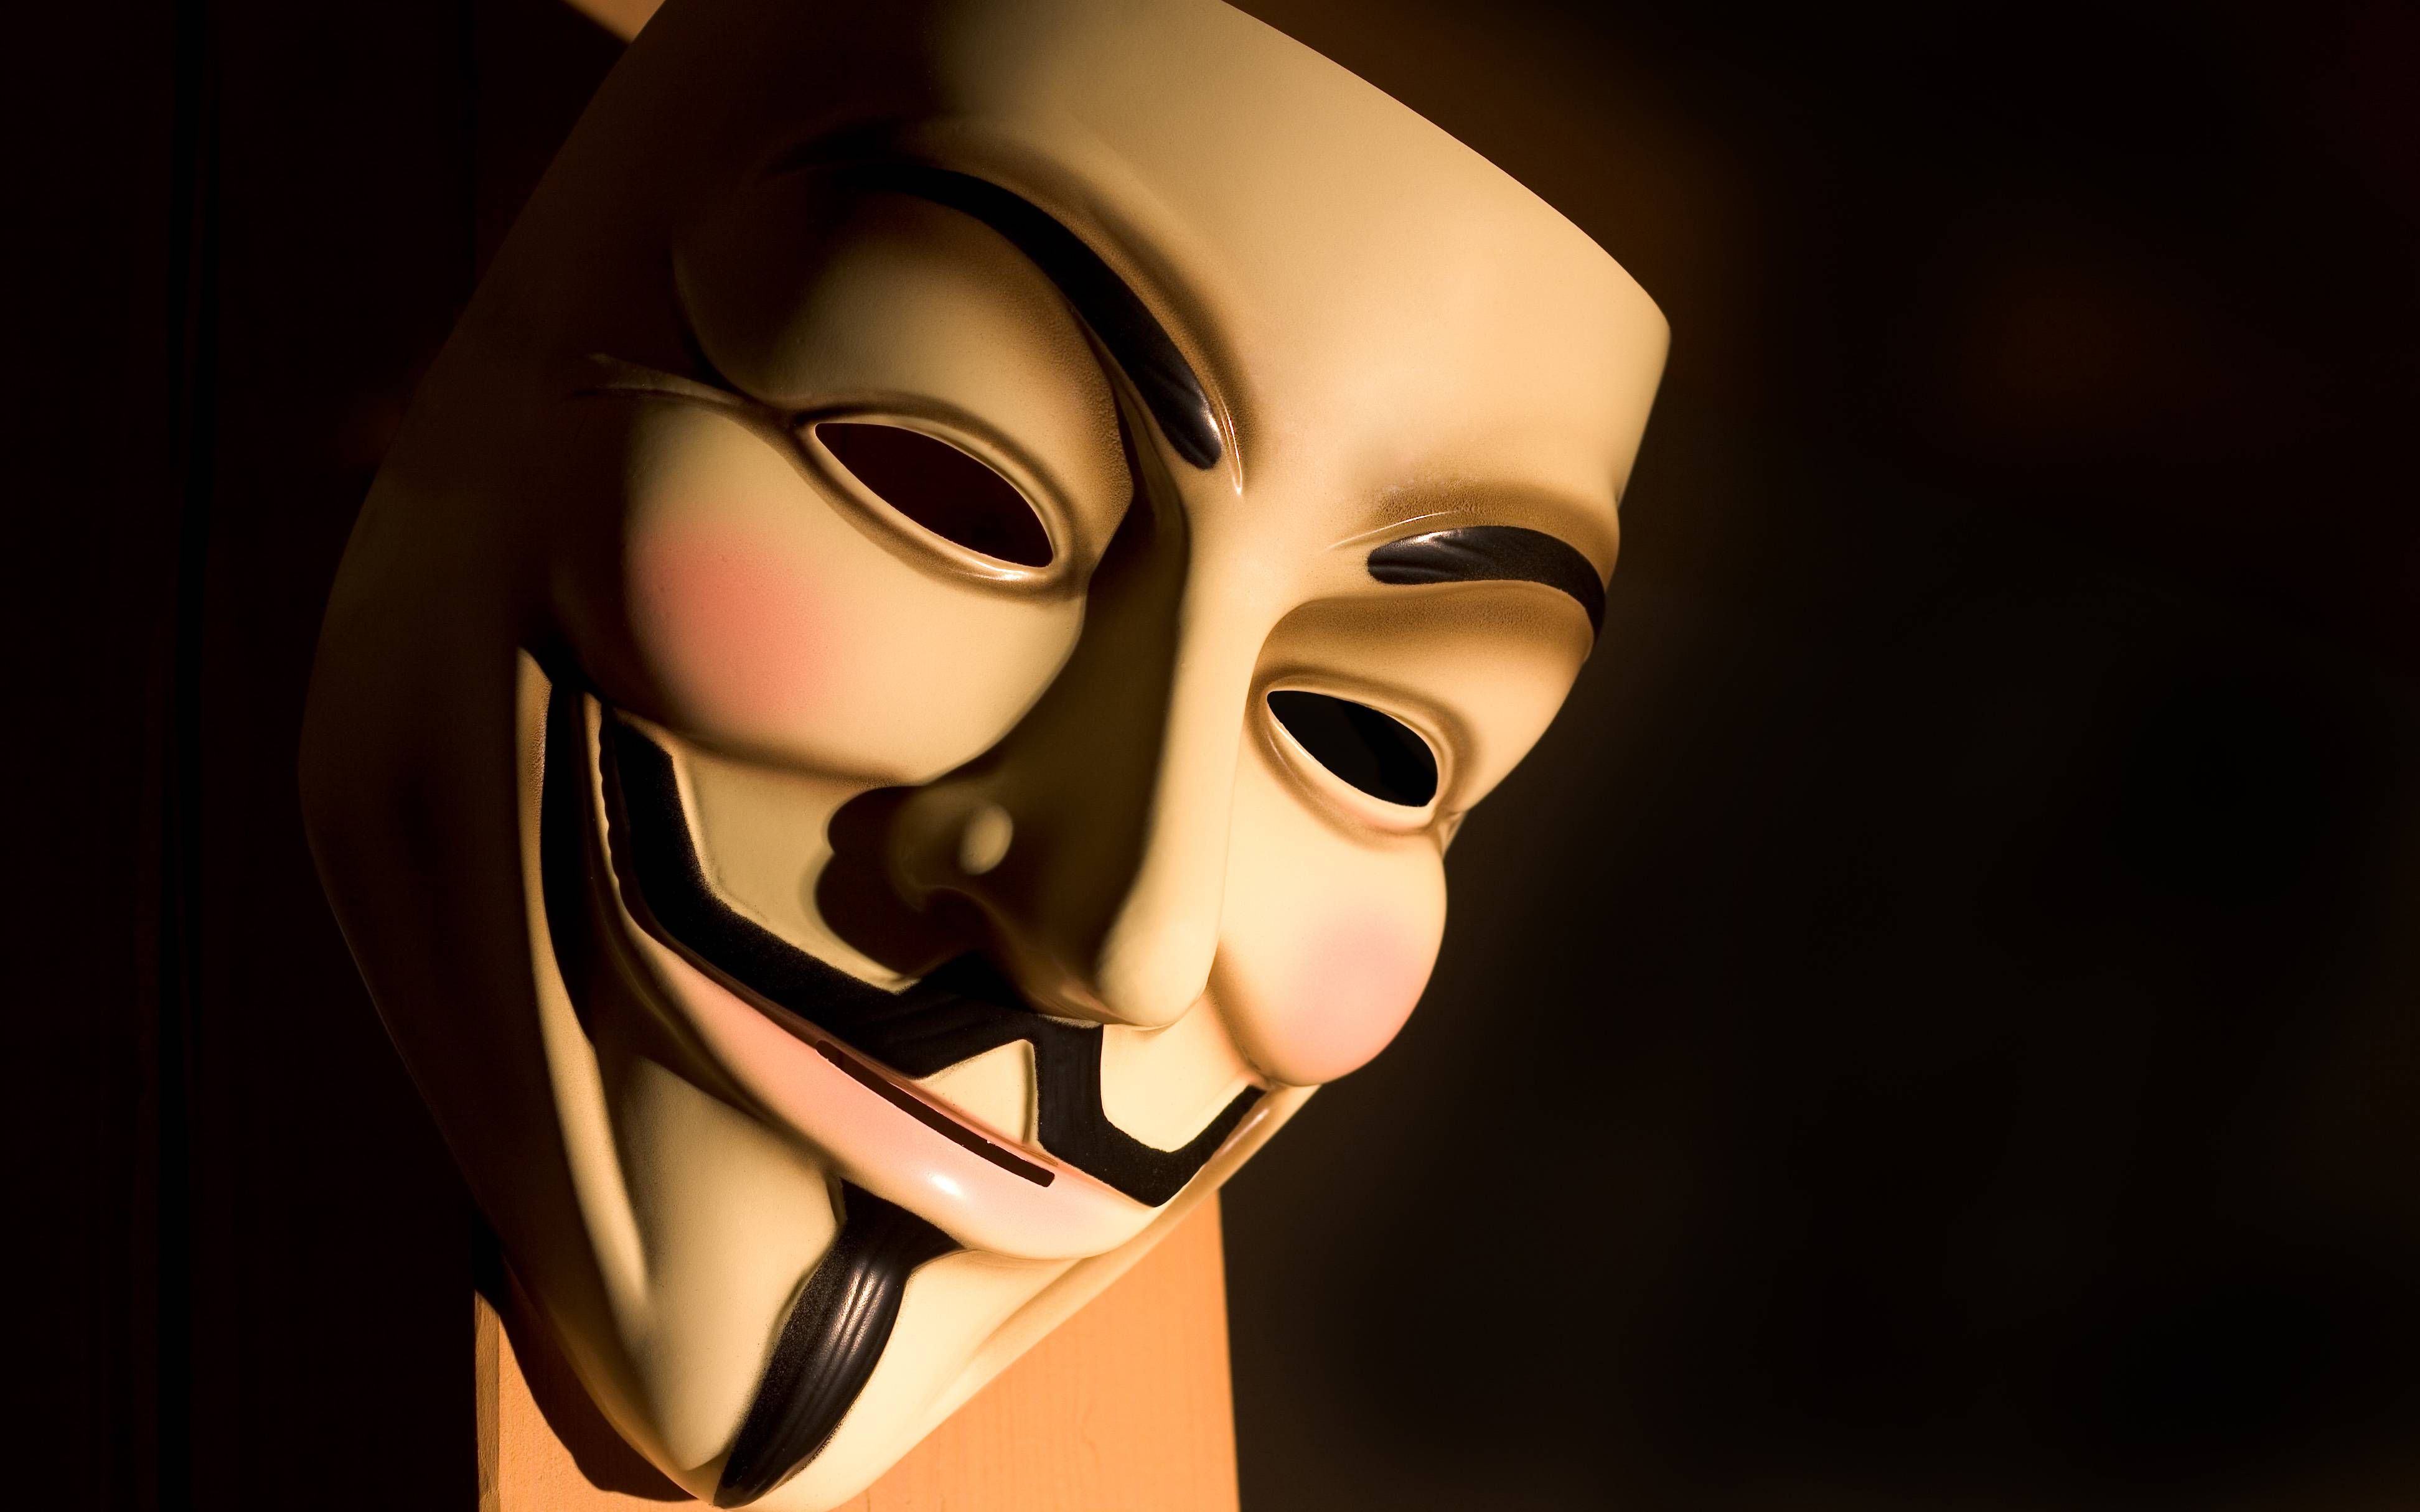 Anonymous v for vendetta wallpaper - (#1500) - High Quality and ...